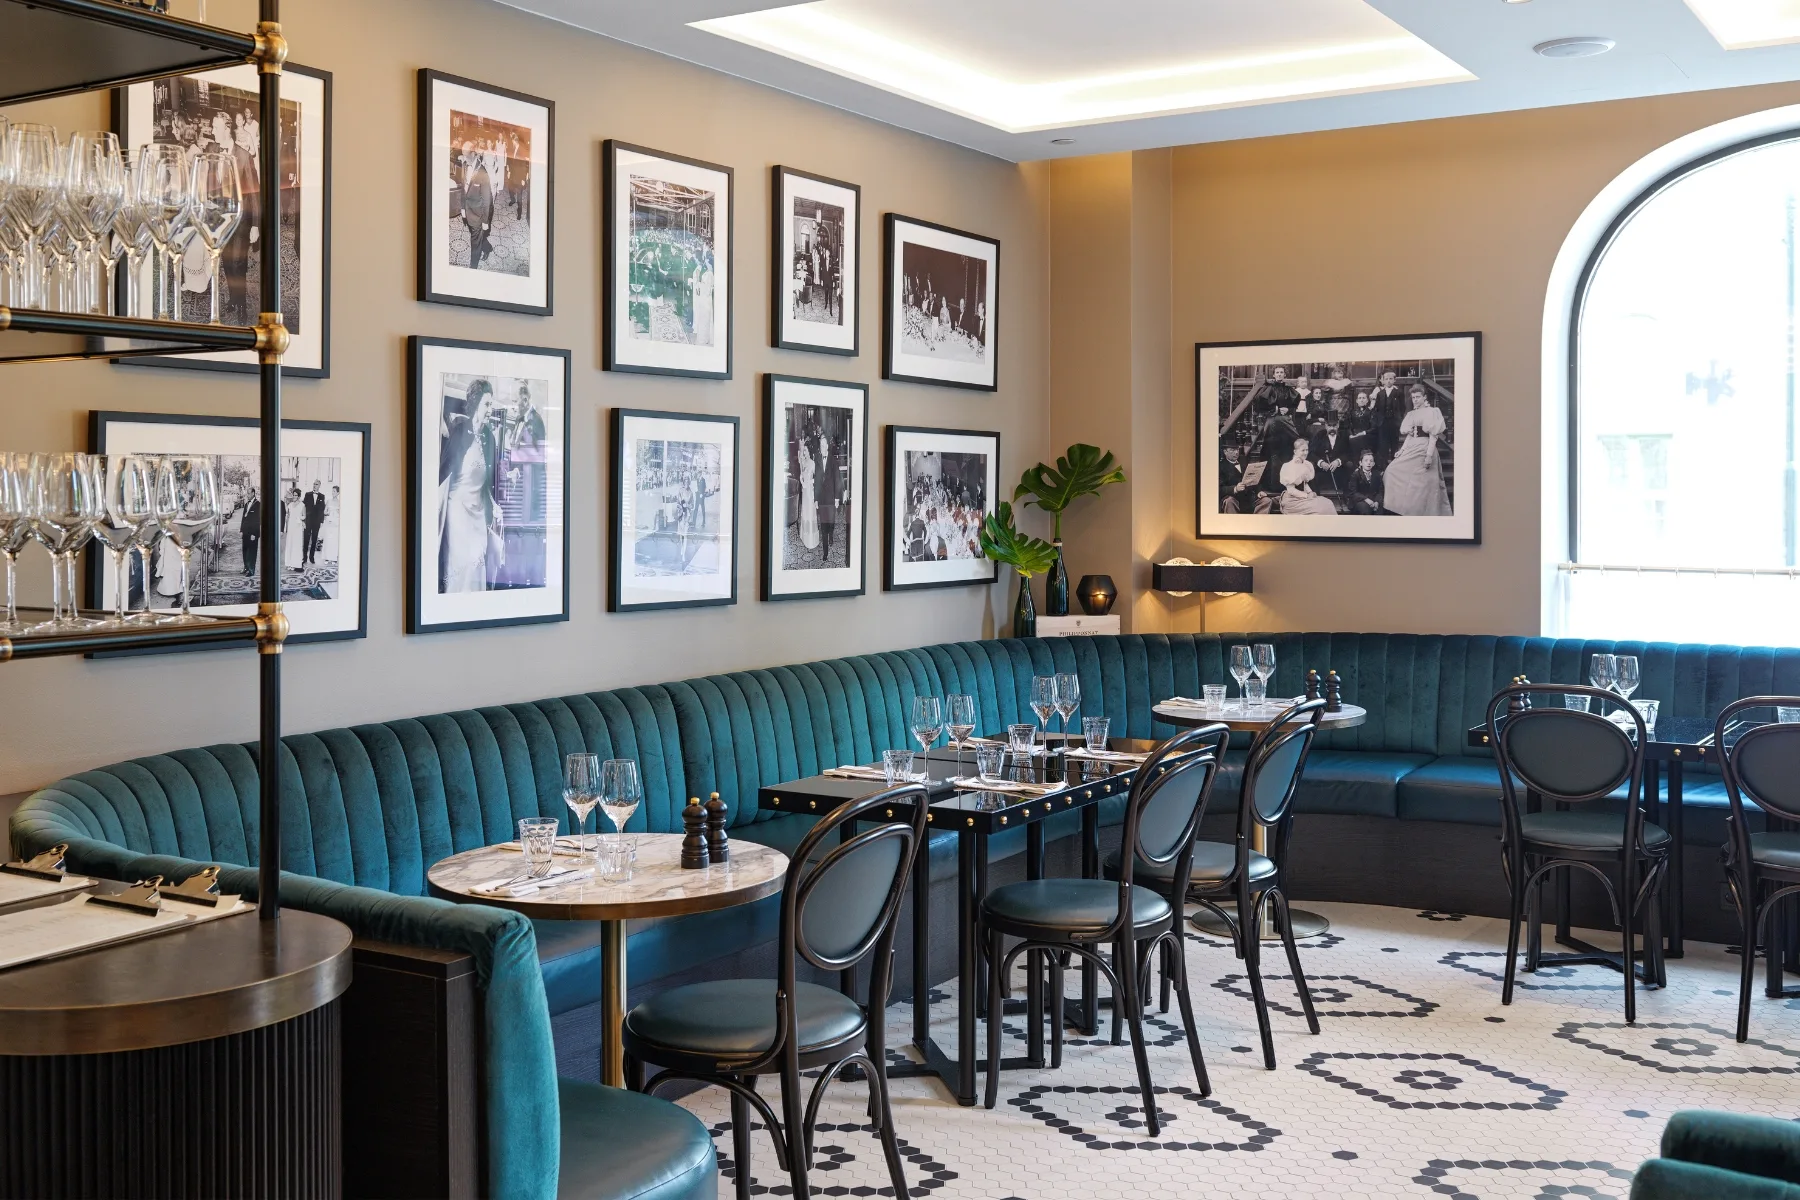 the restaurant interior features contract furniture with blue couches and framed pictures.